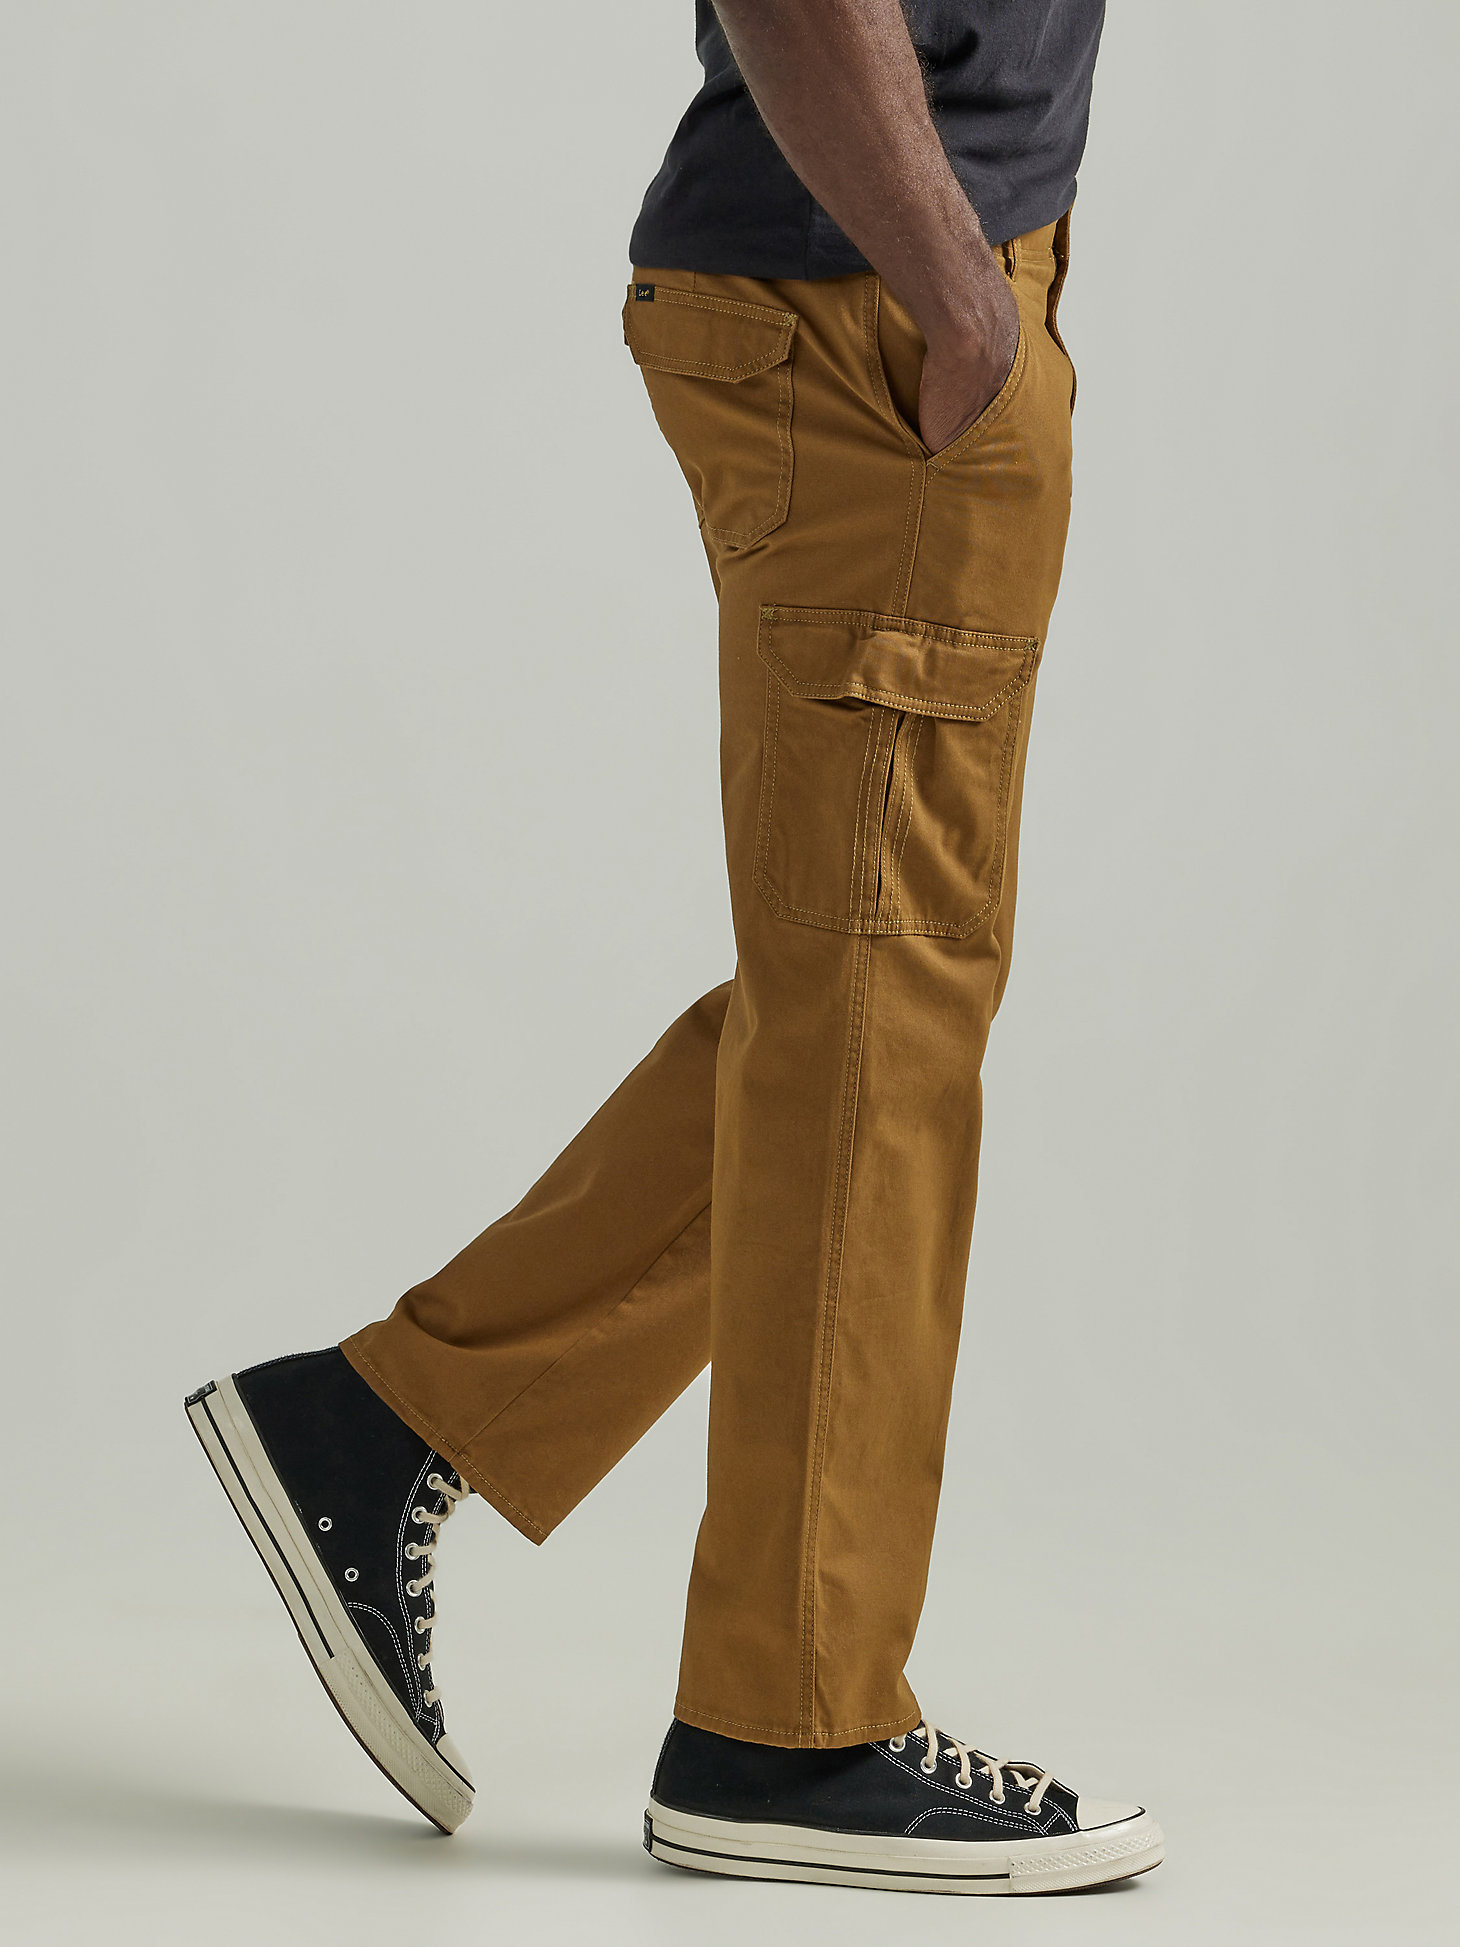 Men's Extreme Motion Cargo Twill Pant in Tumbleweed alternative view 3